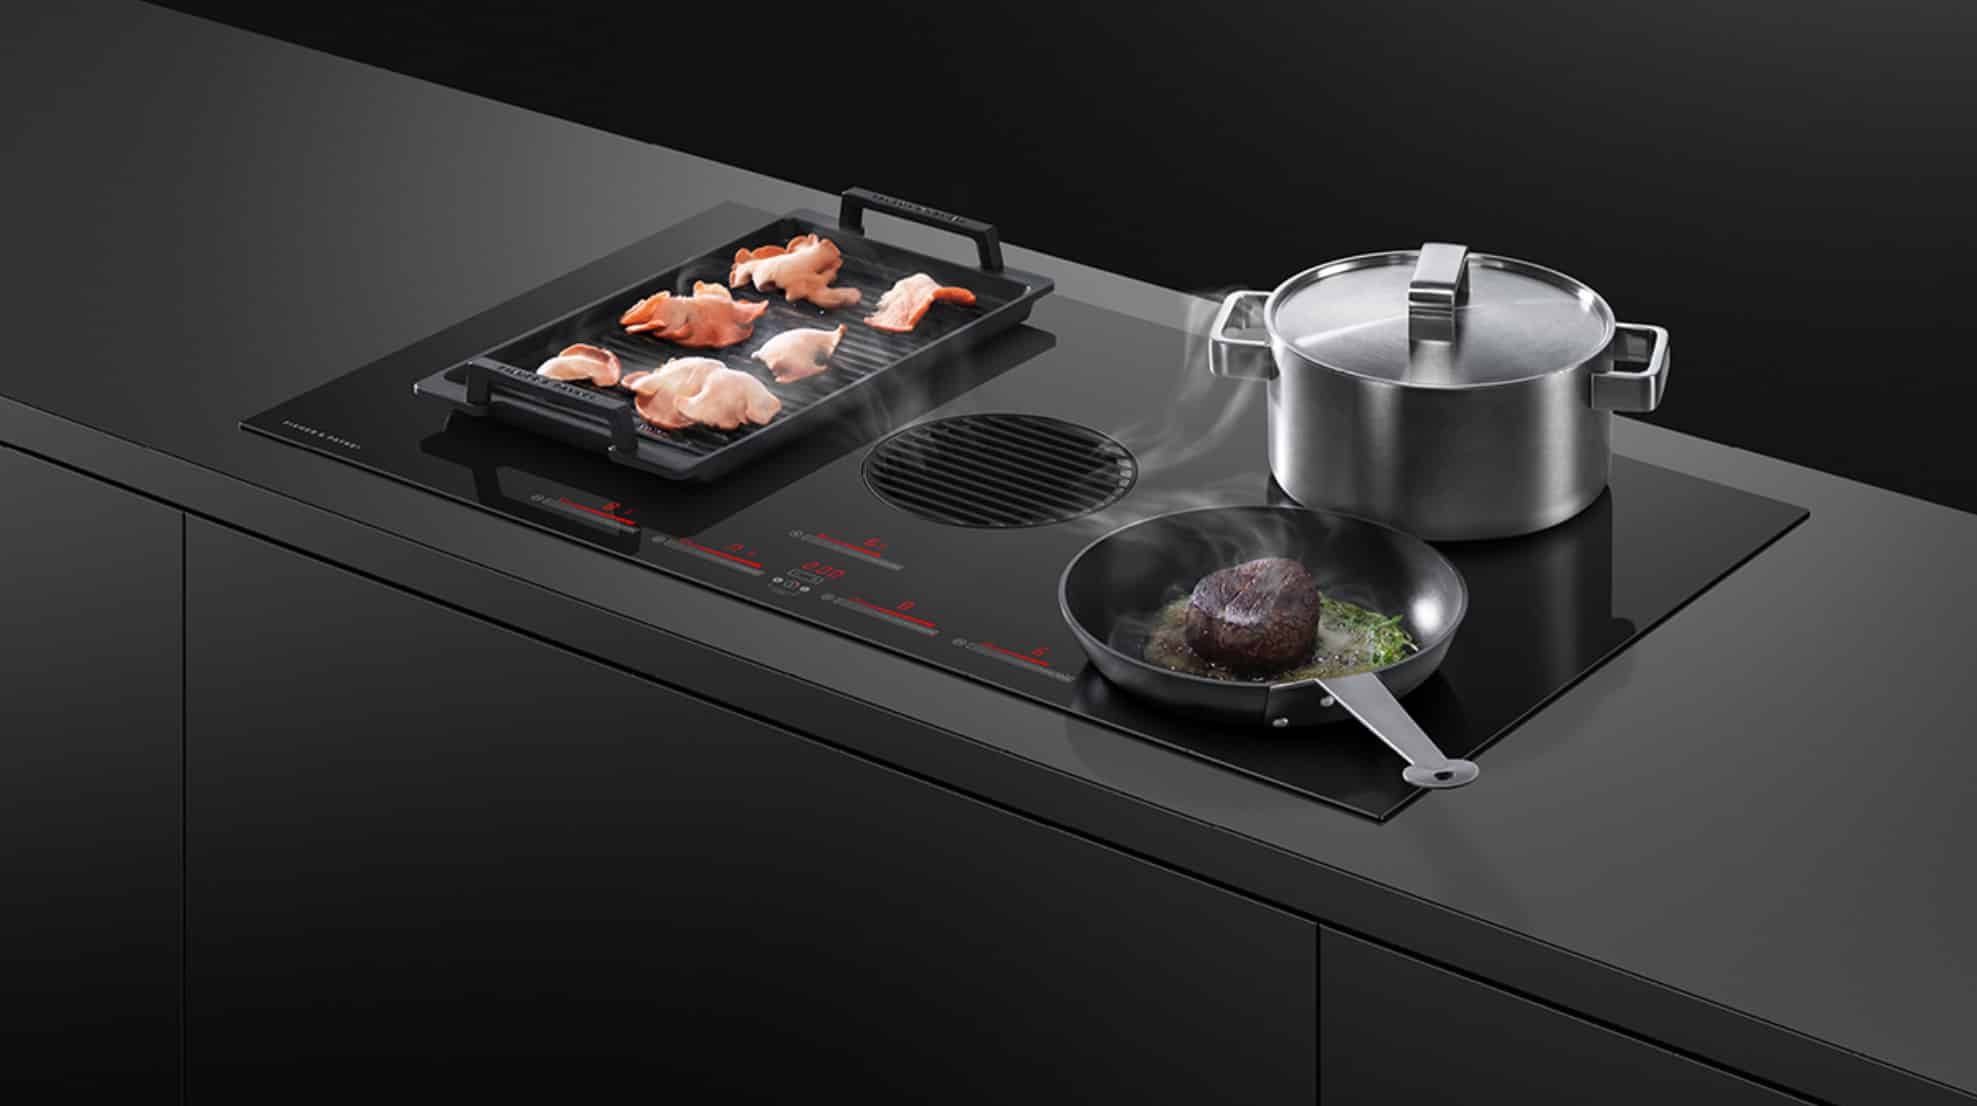 fisher & paykel